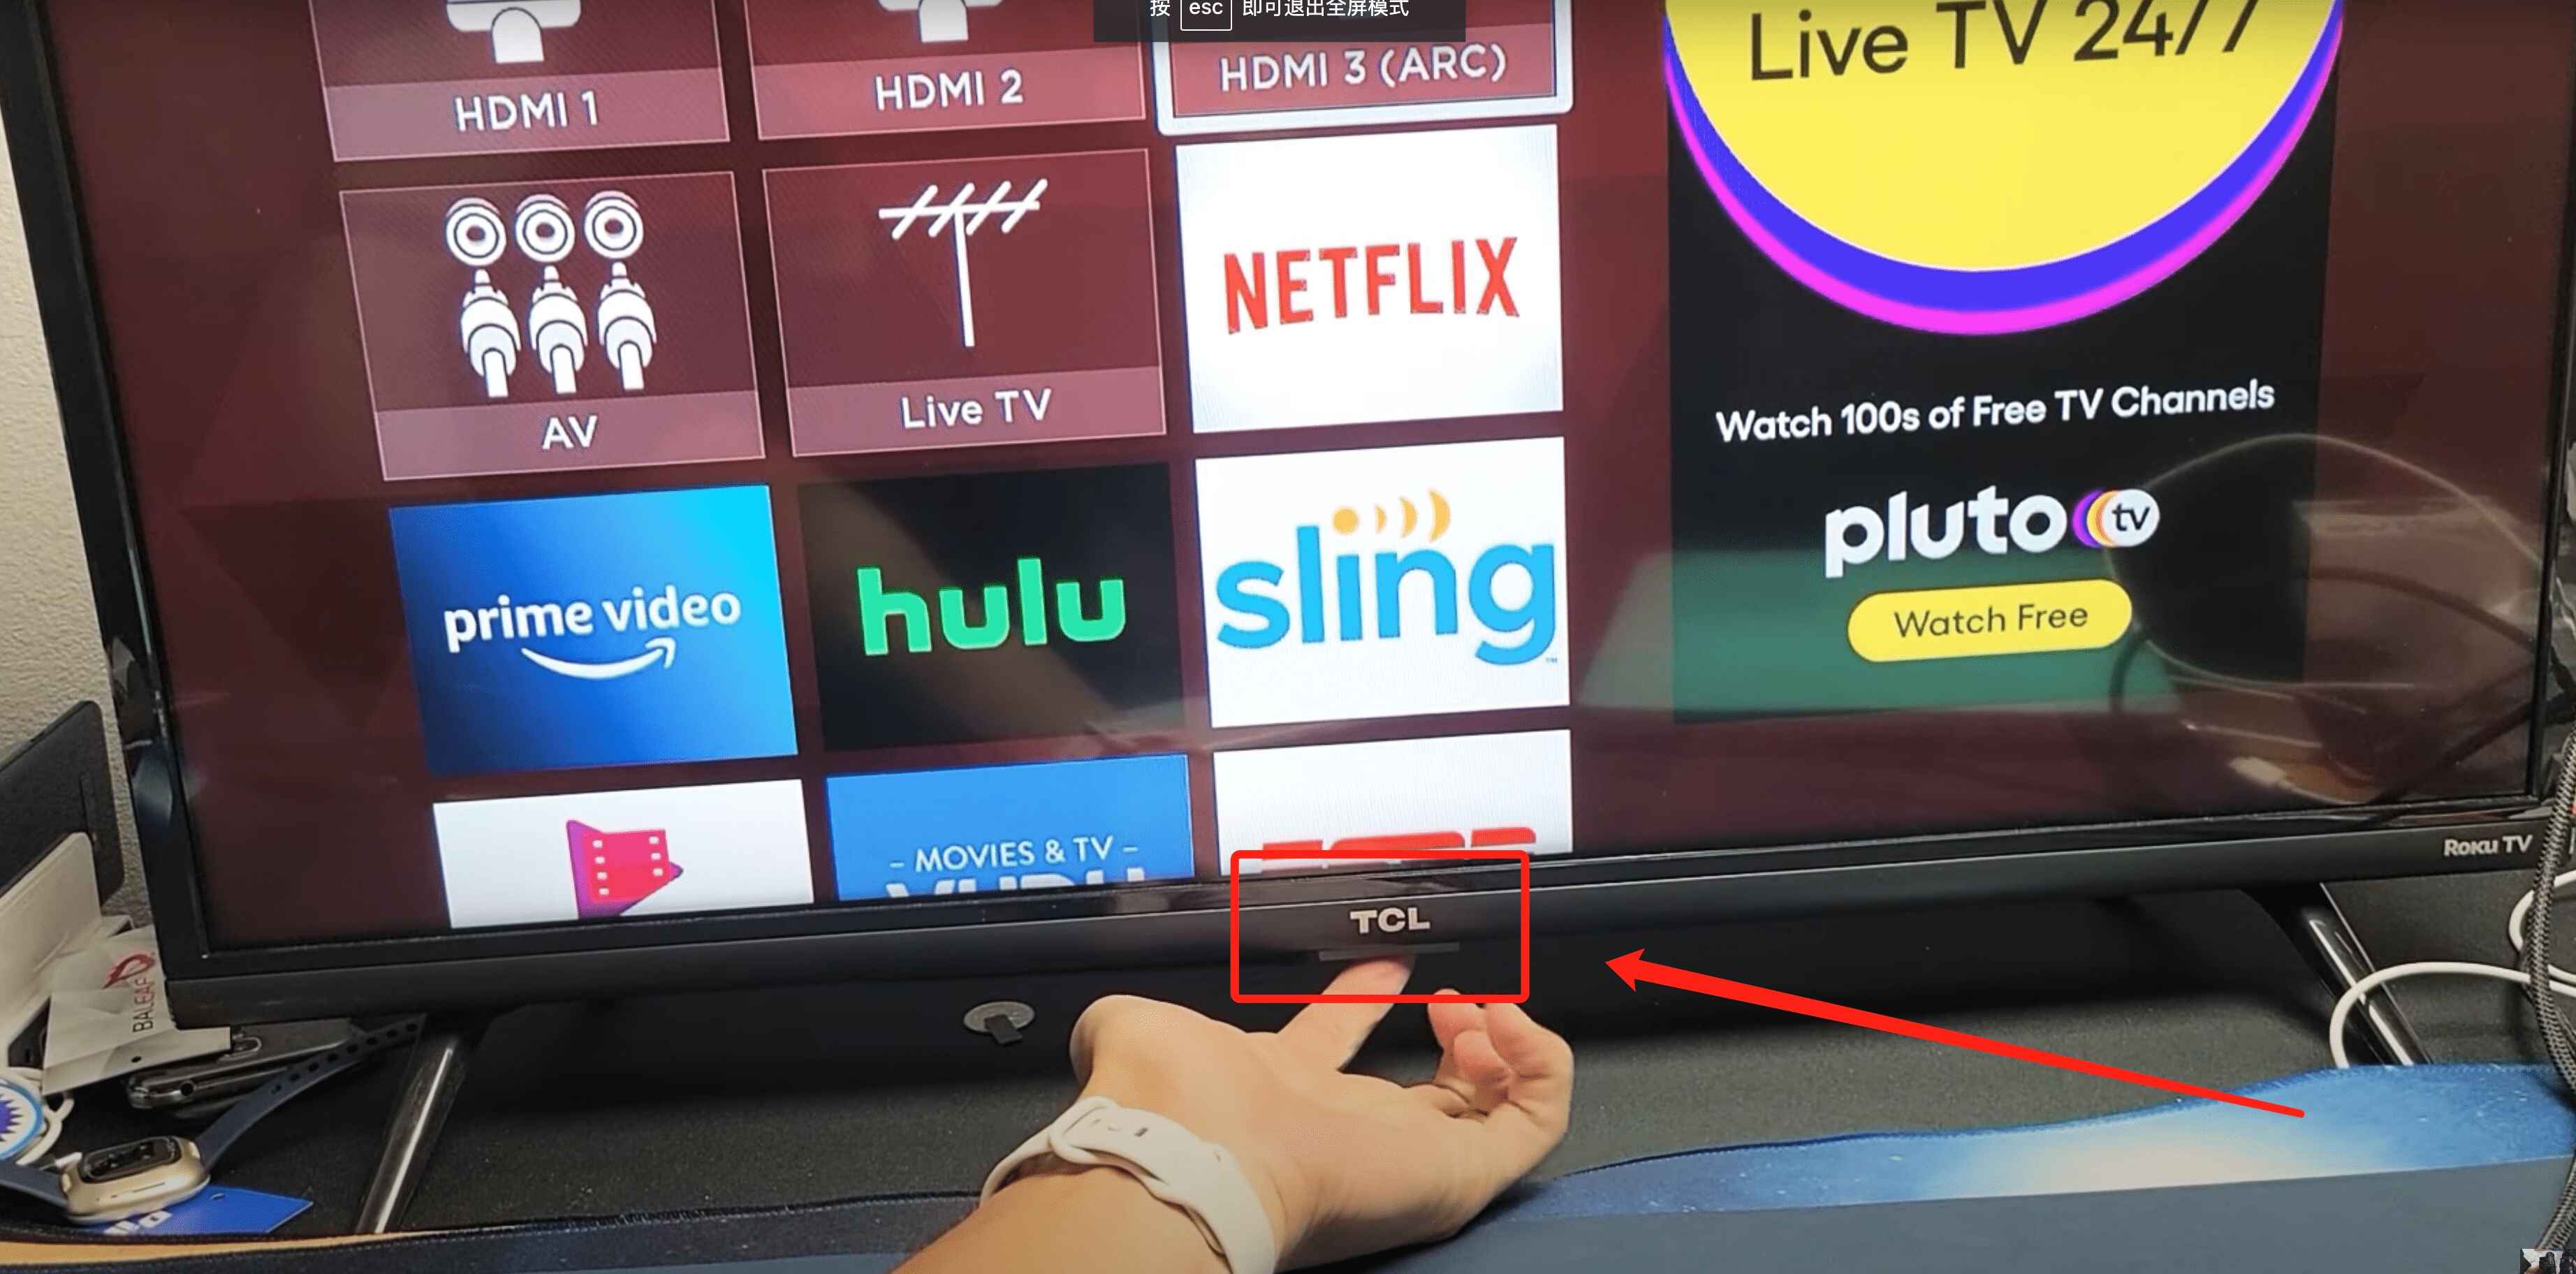 How To Turn On A Roku Tv Without The Remote